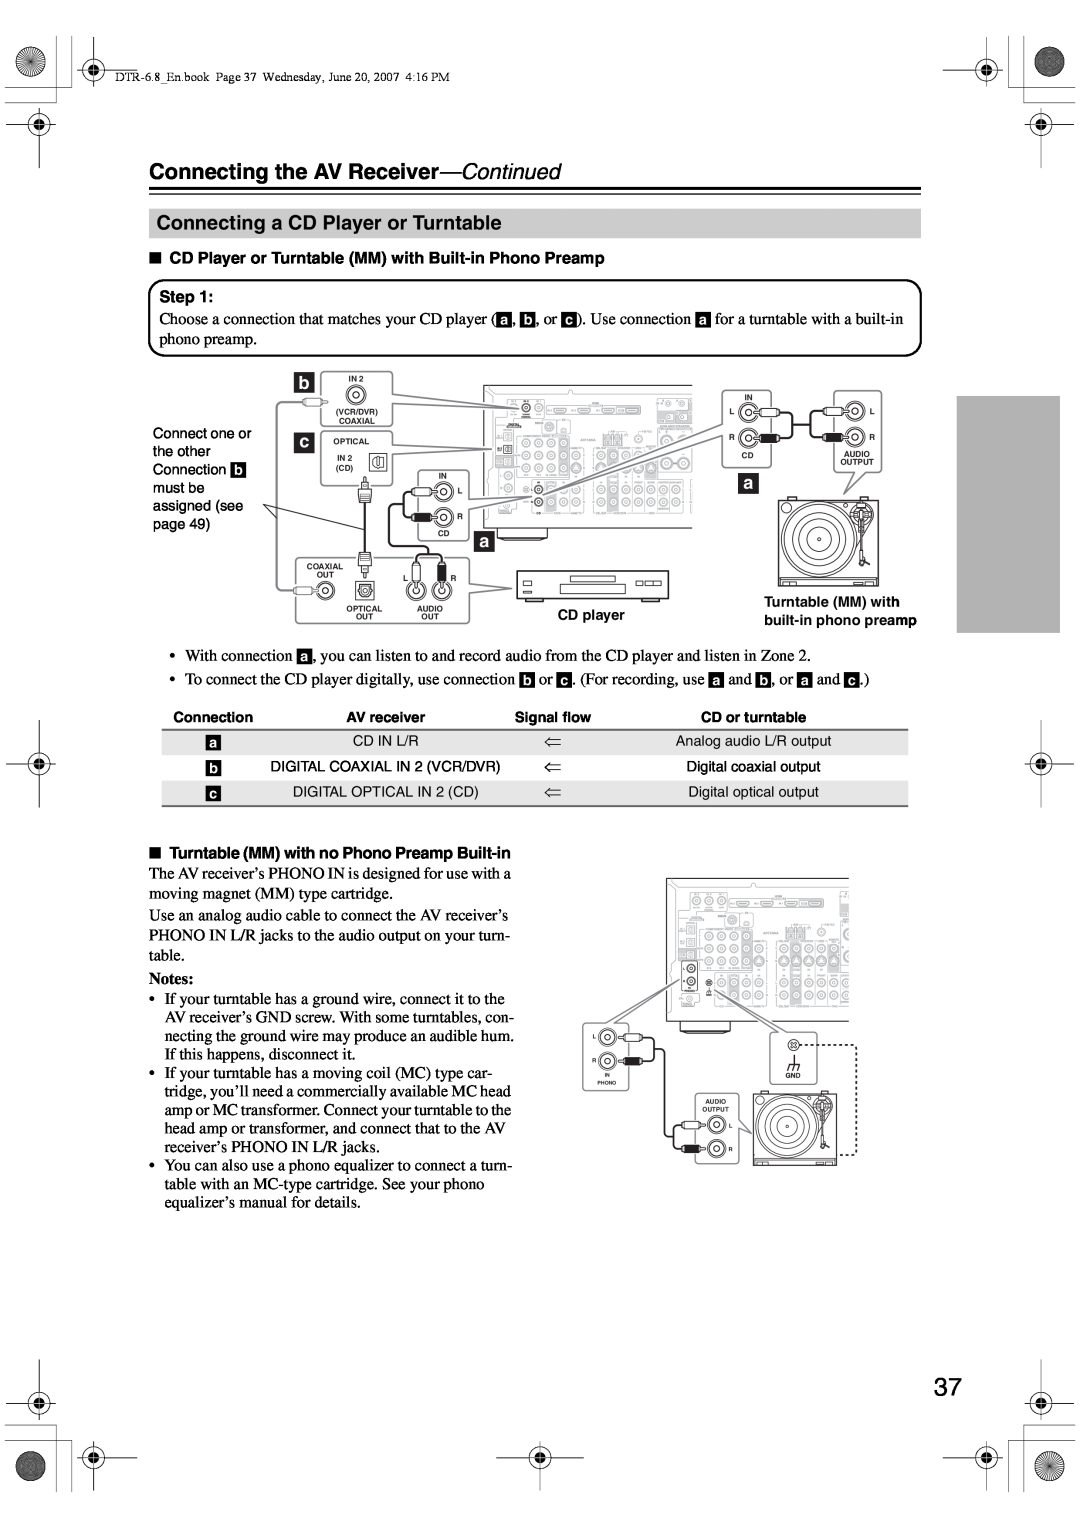 Integra DTR-6.8 instruction manual Connecting a CD Player or Turntable, Connecting the AV Receiver—Continued, Step, Notes 